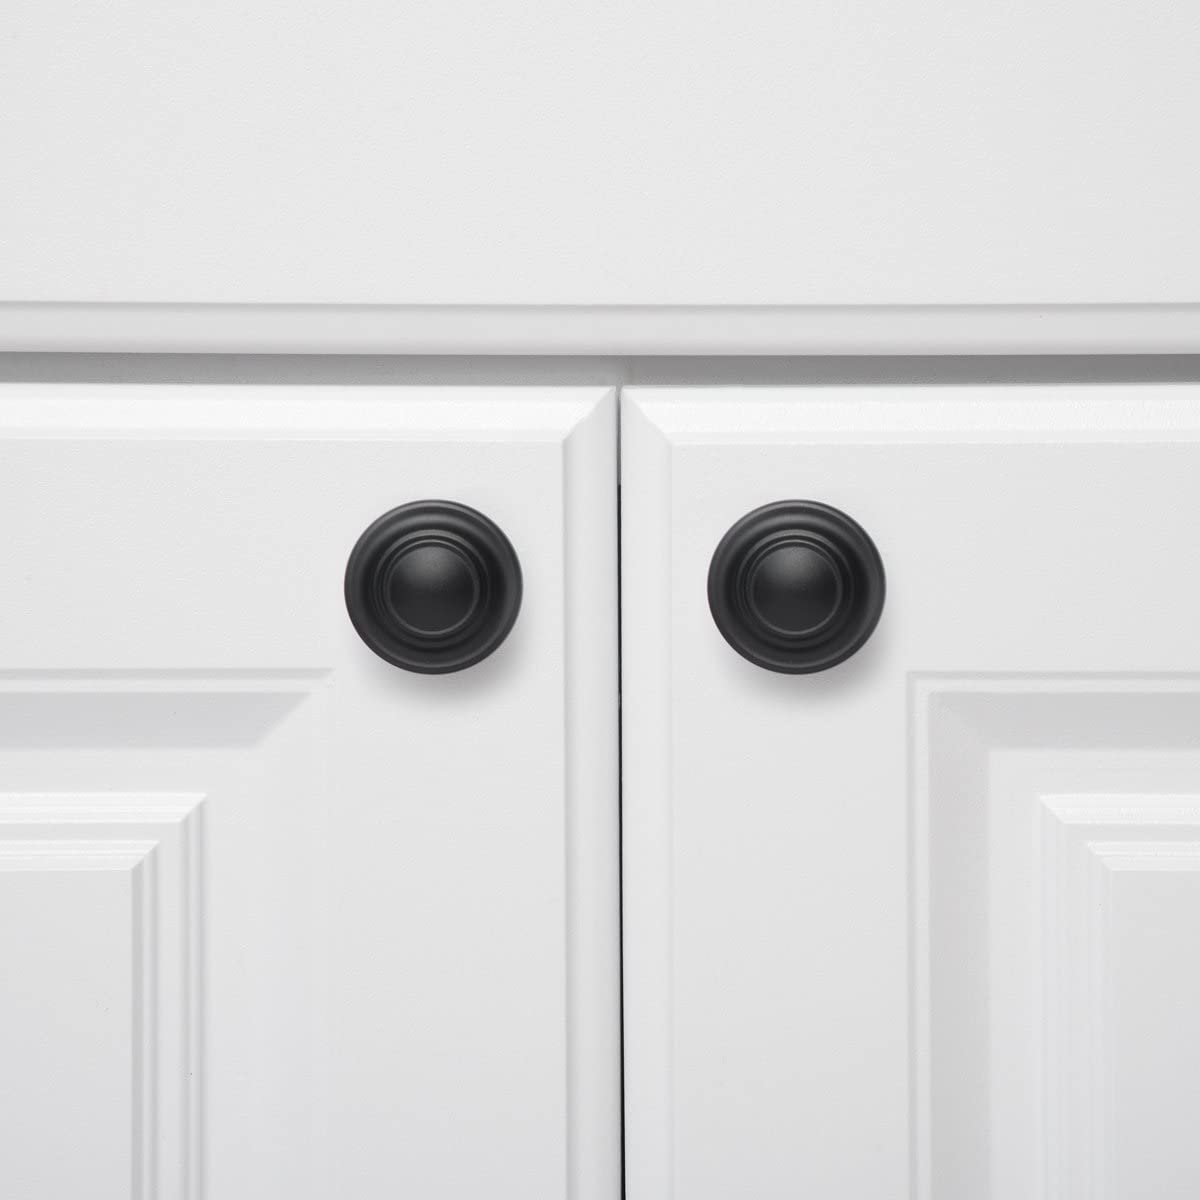 AmazonBasics Cabinet Knobs Traditional Top Rings Cabinet Knob Flat Black 1.25 inches Diameter Pack of 10